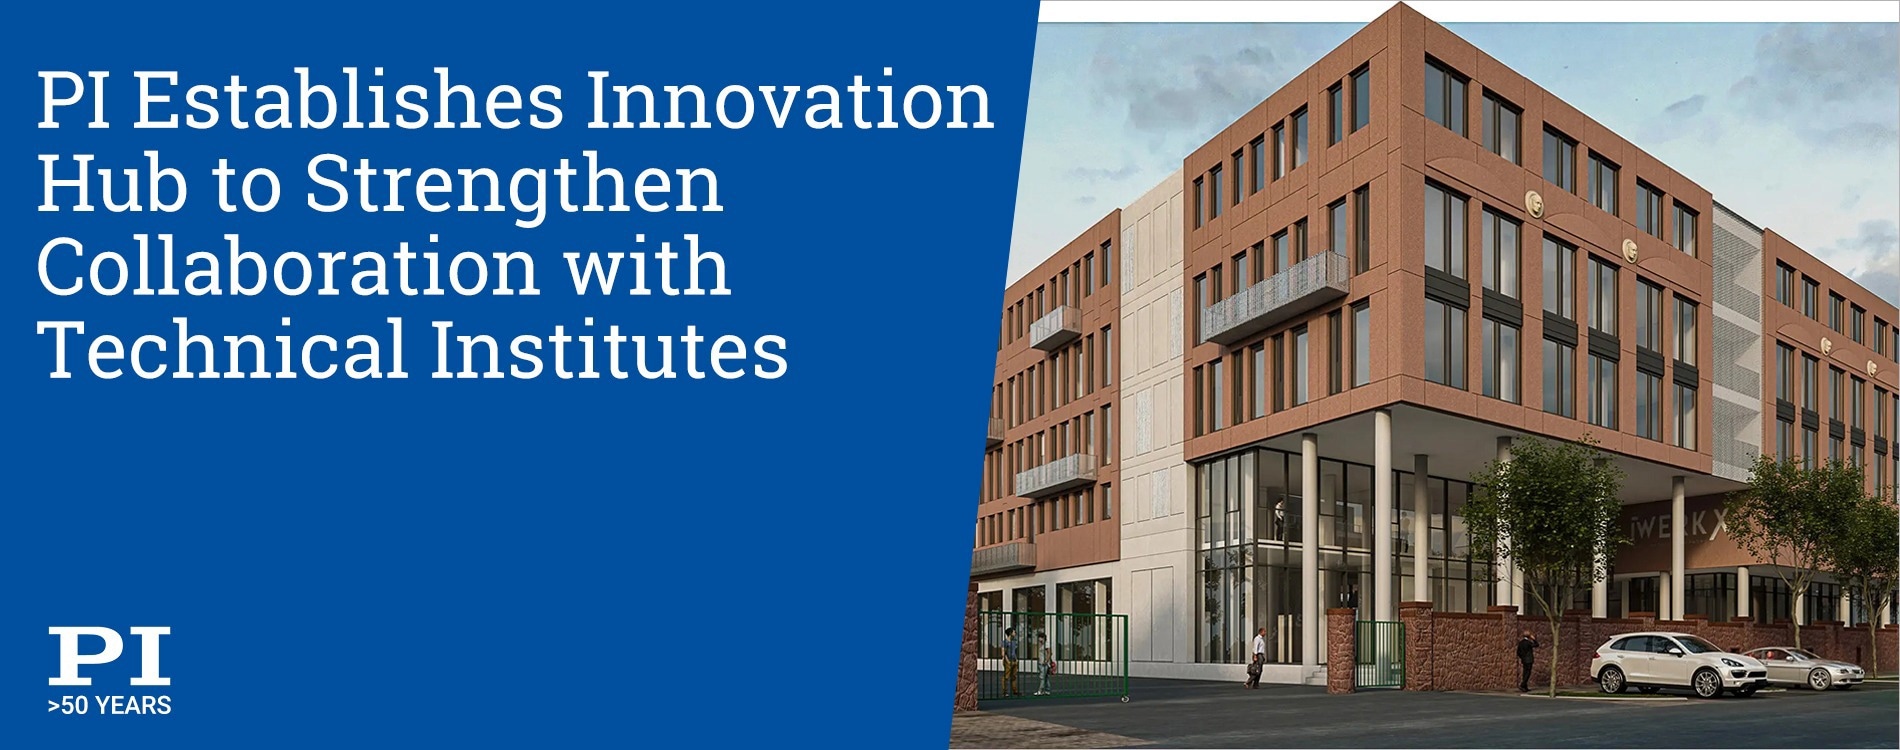 PI Establishes Innovation Hub to Strengthen Collaboration with Technical Research Institutes